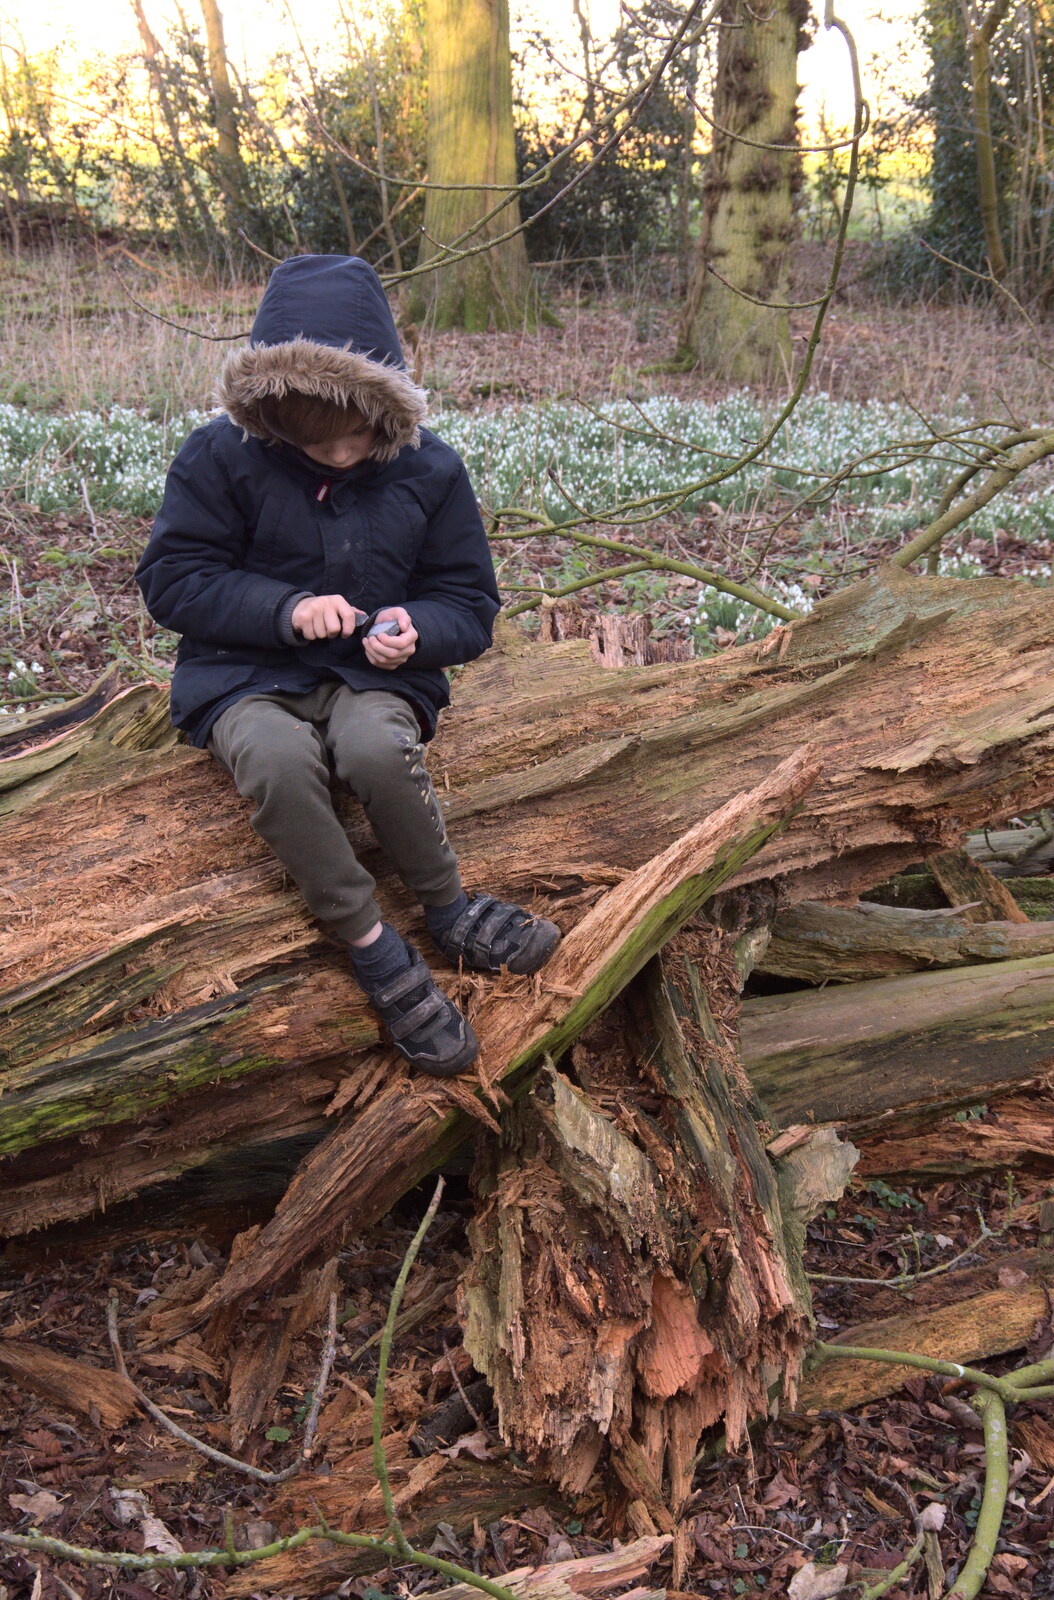 Harry does a bit of whittling from Snowdrops at Talconeston Hall, Tacolneston, Norfolk - 7th February 2020